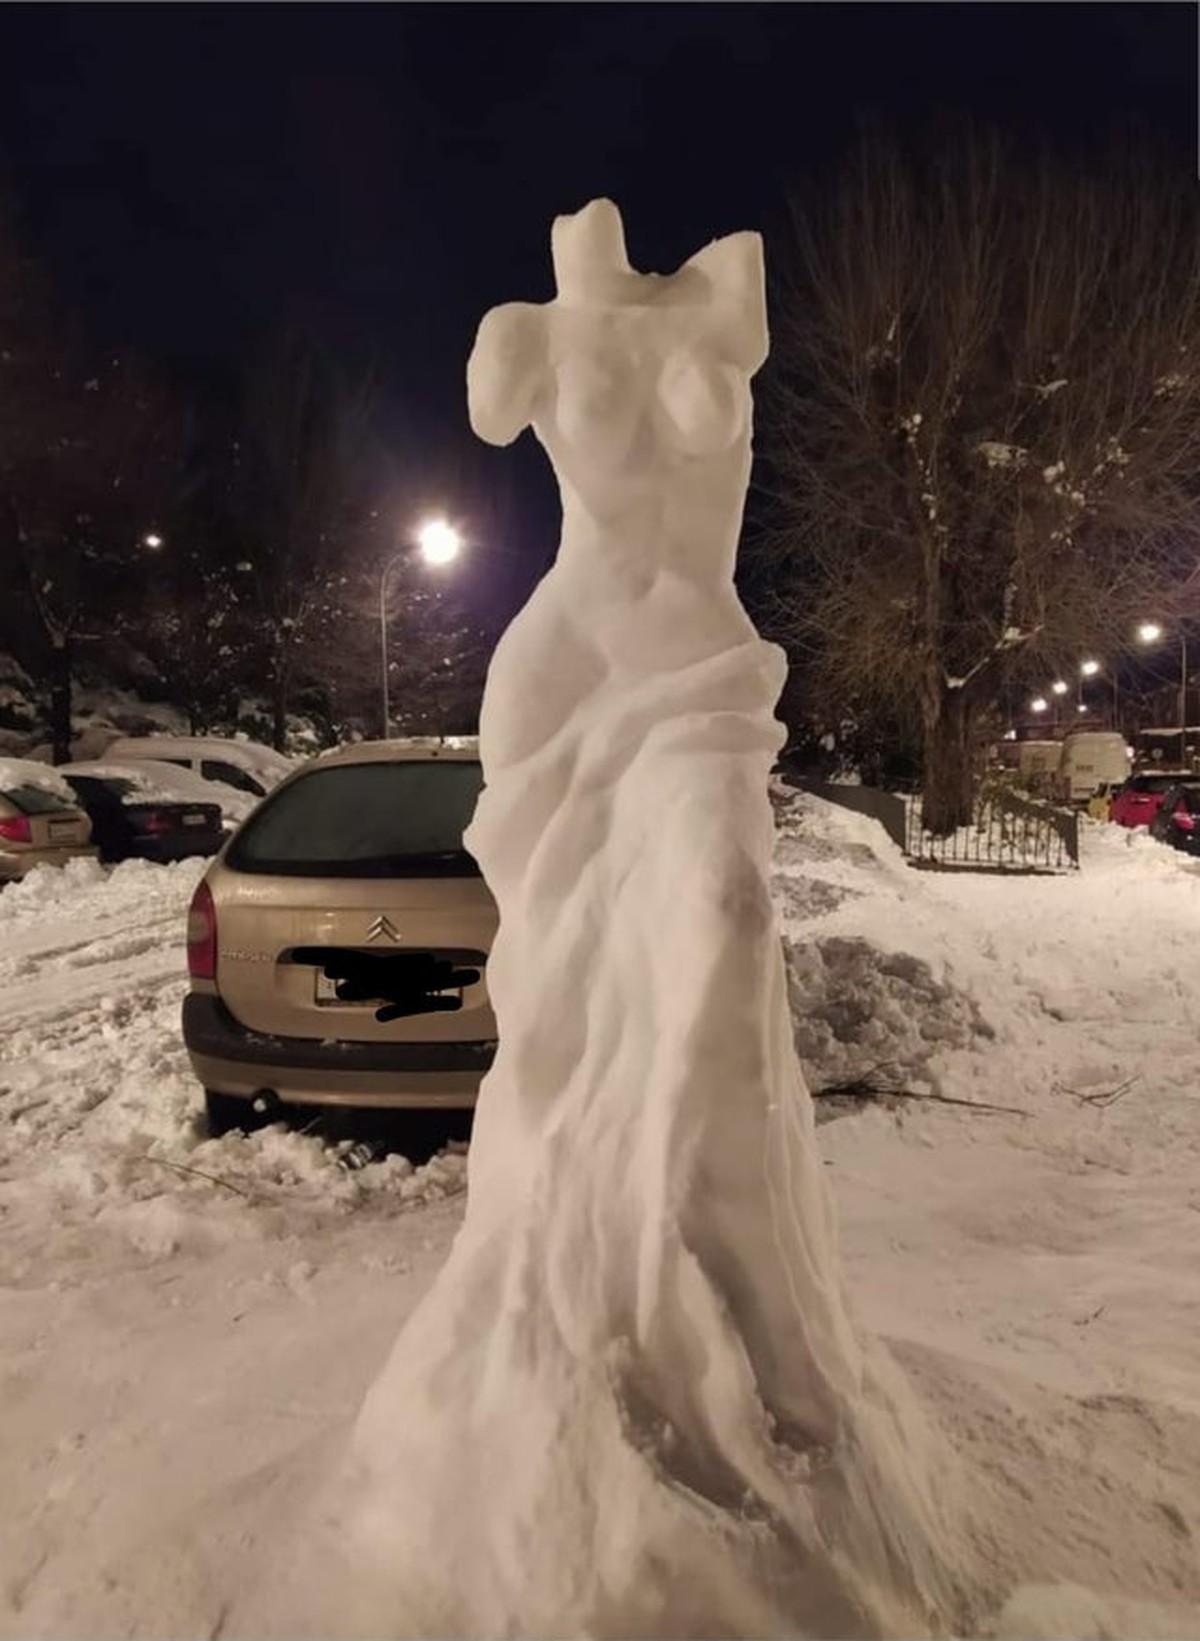 Sculpture with a woman's body made with snow 